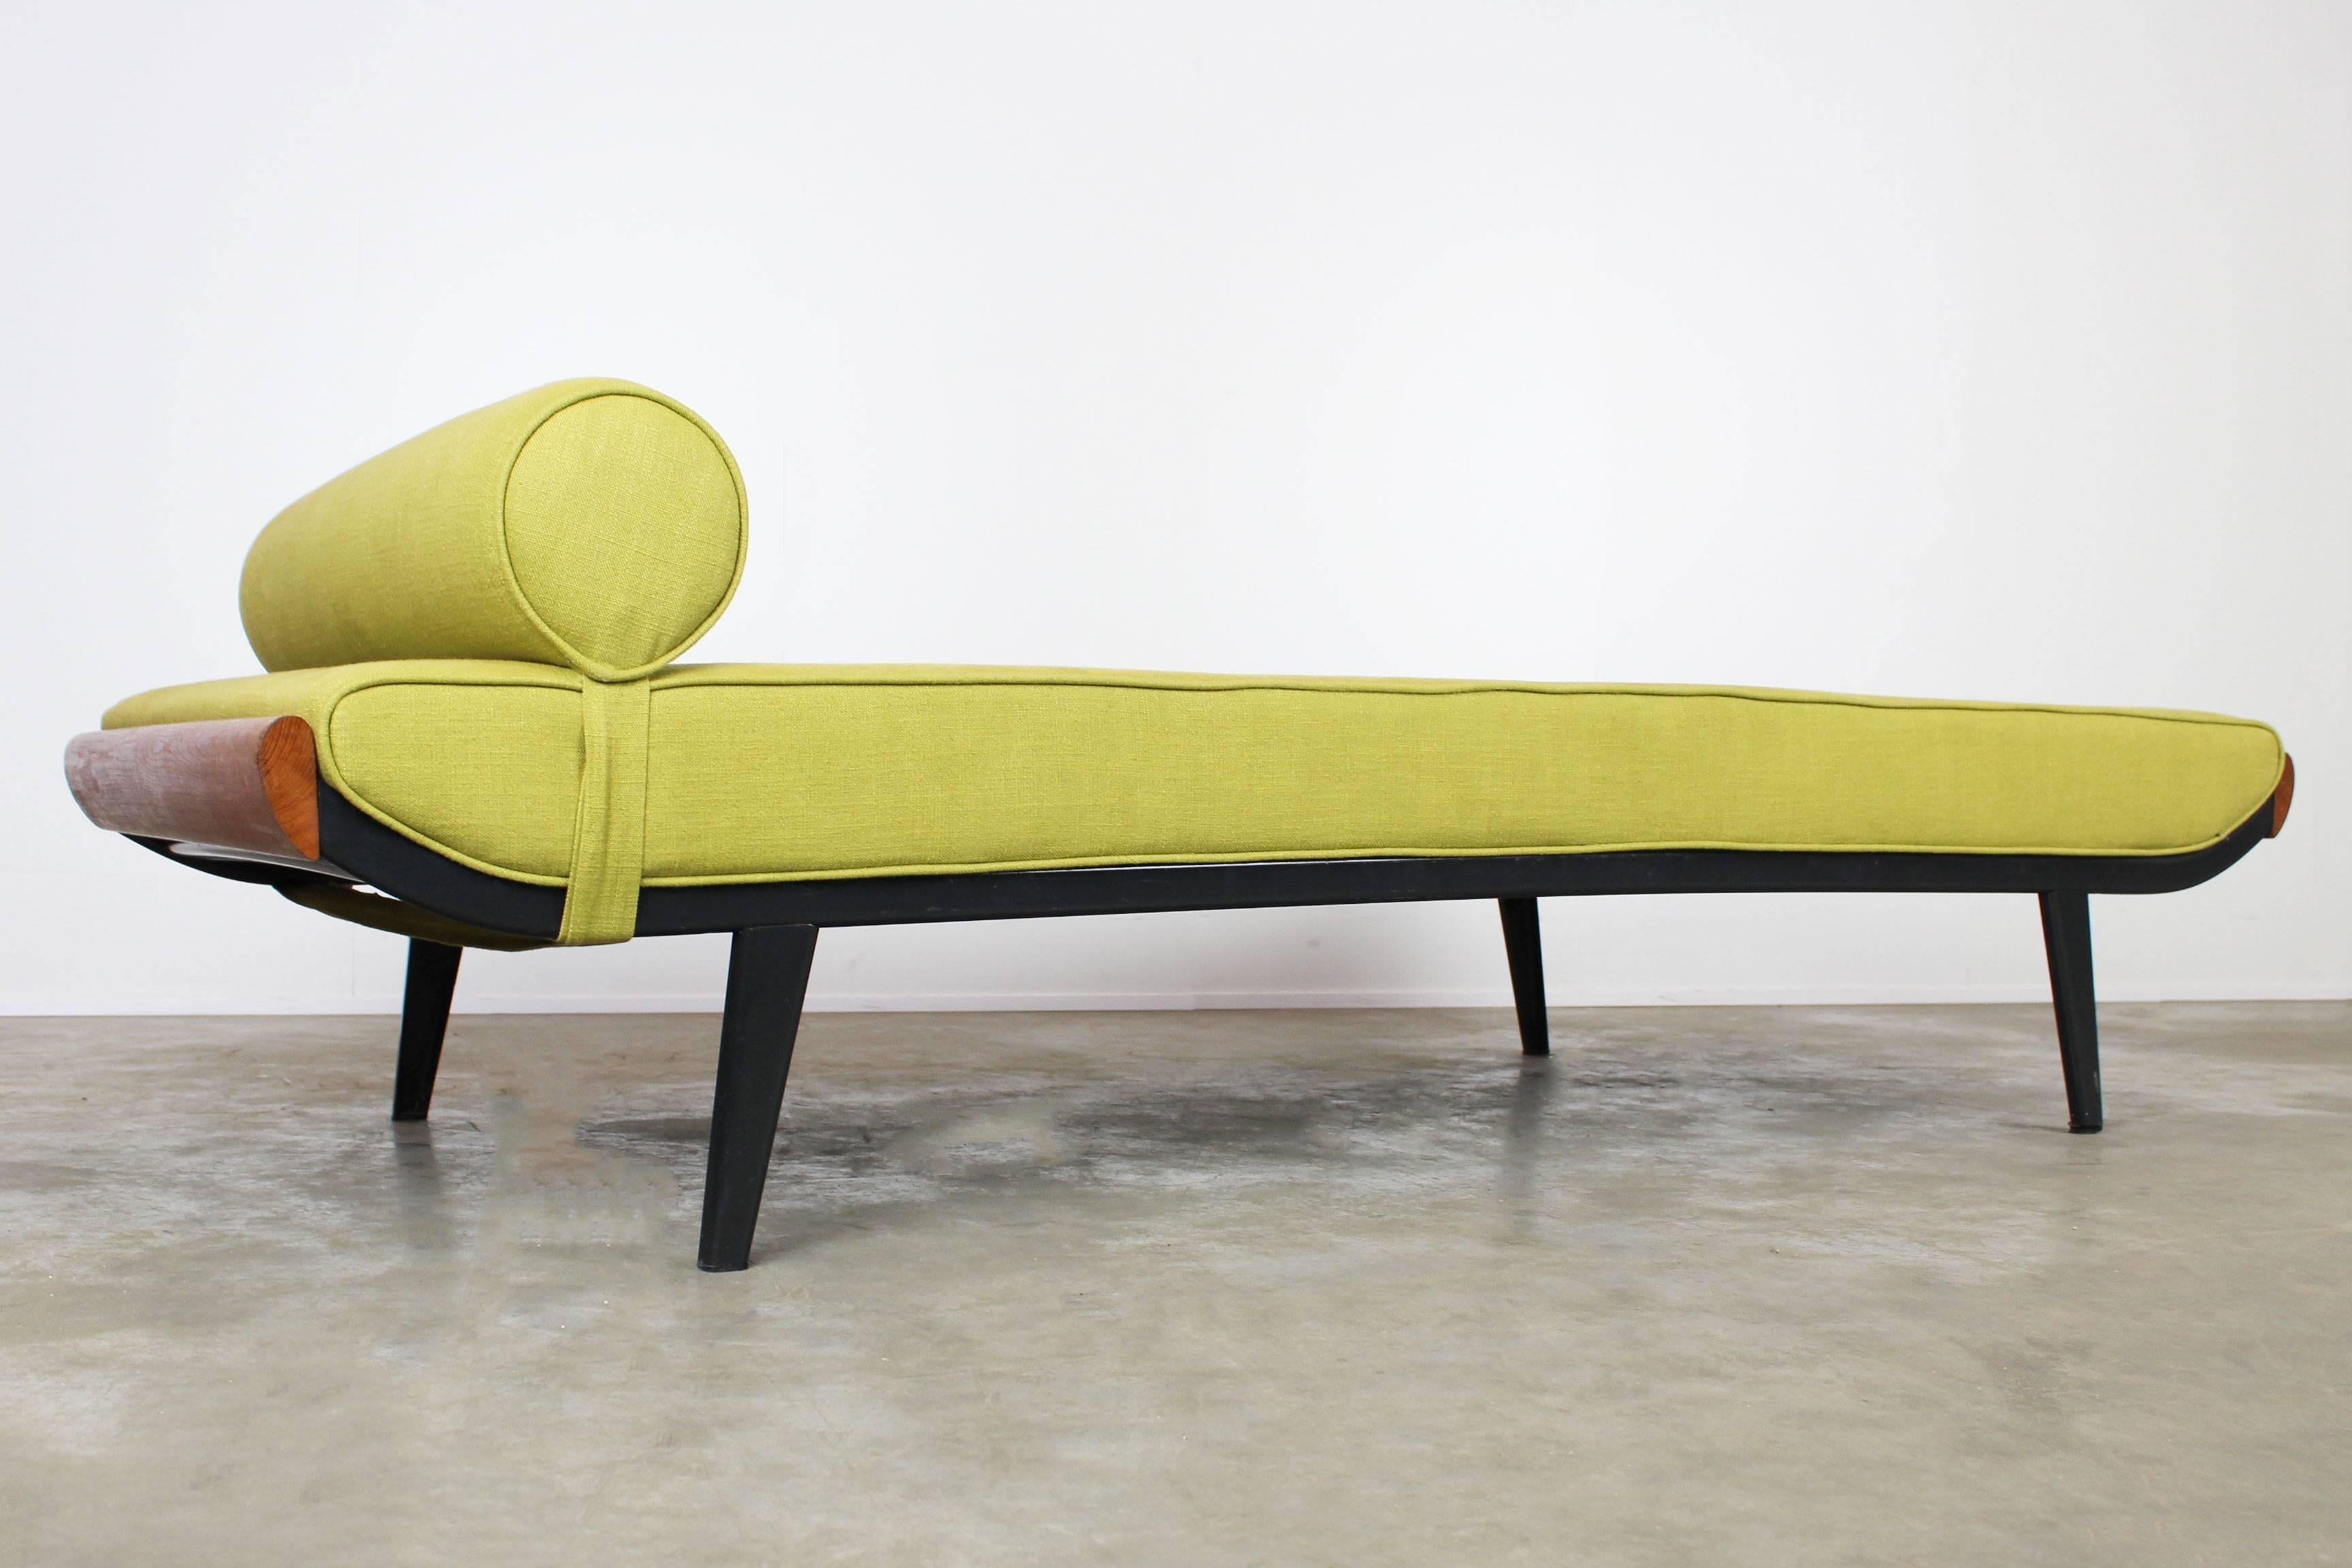 Mid-Century Modern Cleopatra Daybed by Dick Cordemeijer for Auping, 1953, Dutch Design Black Green